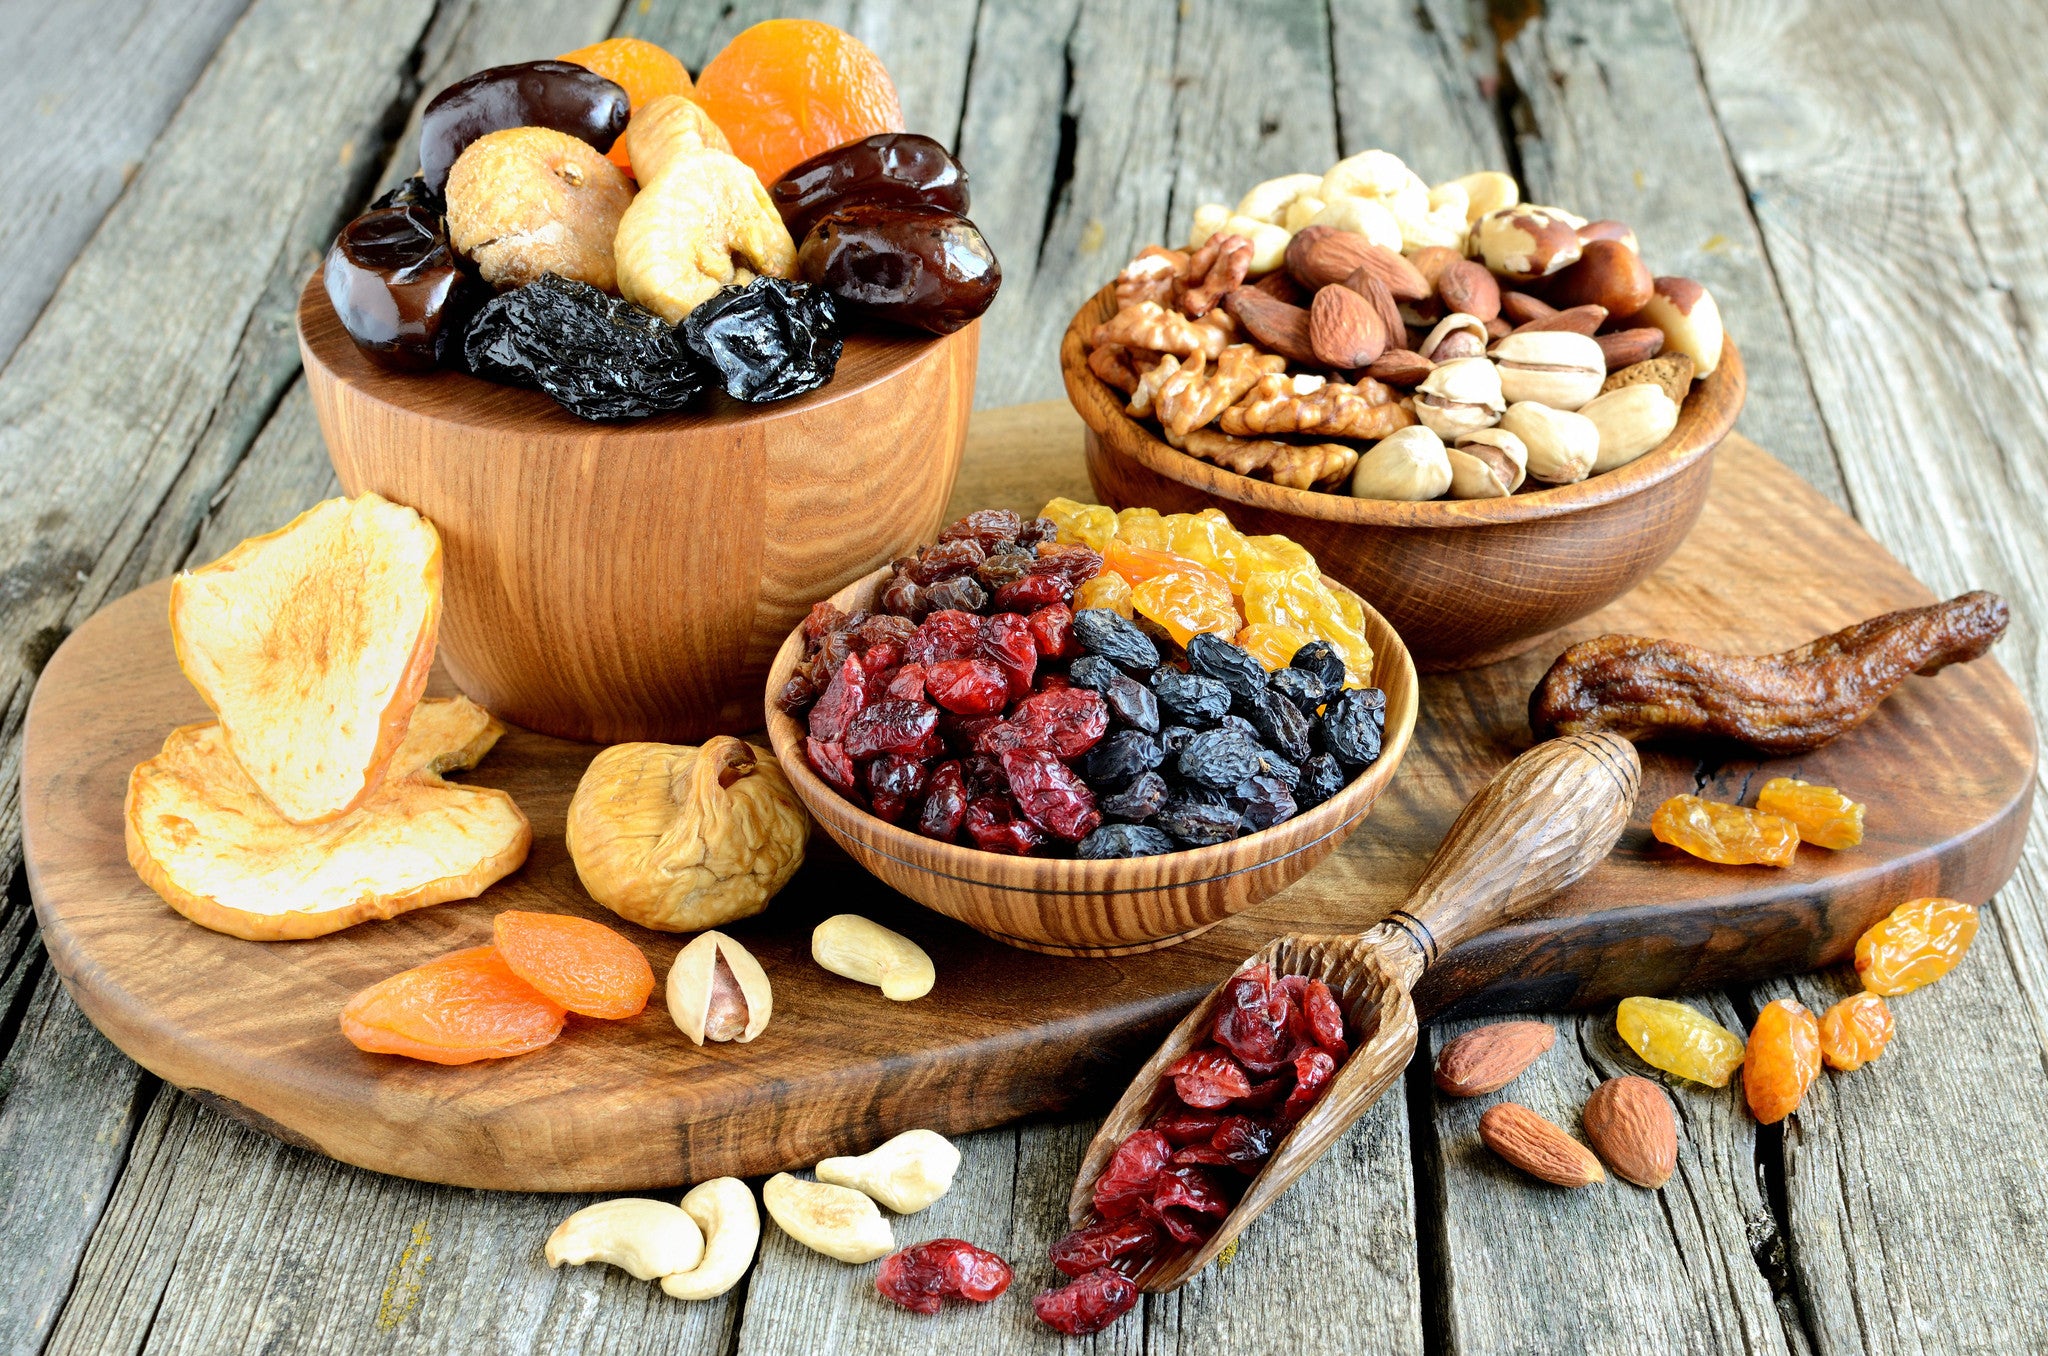 5 Insane Benefits From Making Fruit And Nuts A Regular Part Of Your Di – Bee Fruitty & Nutty